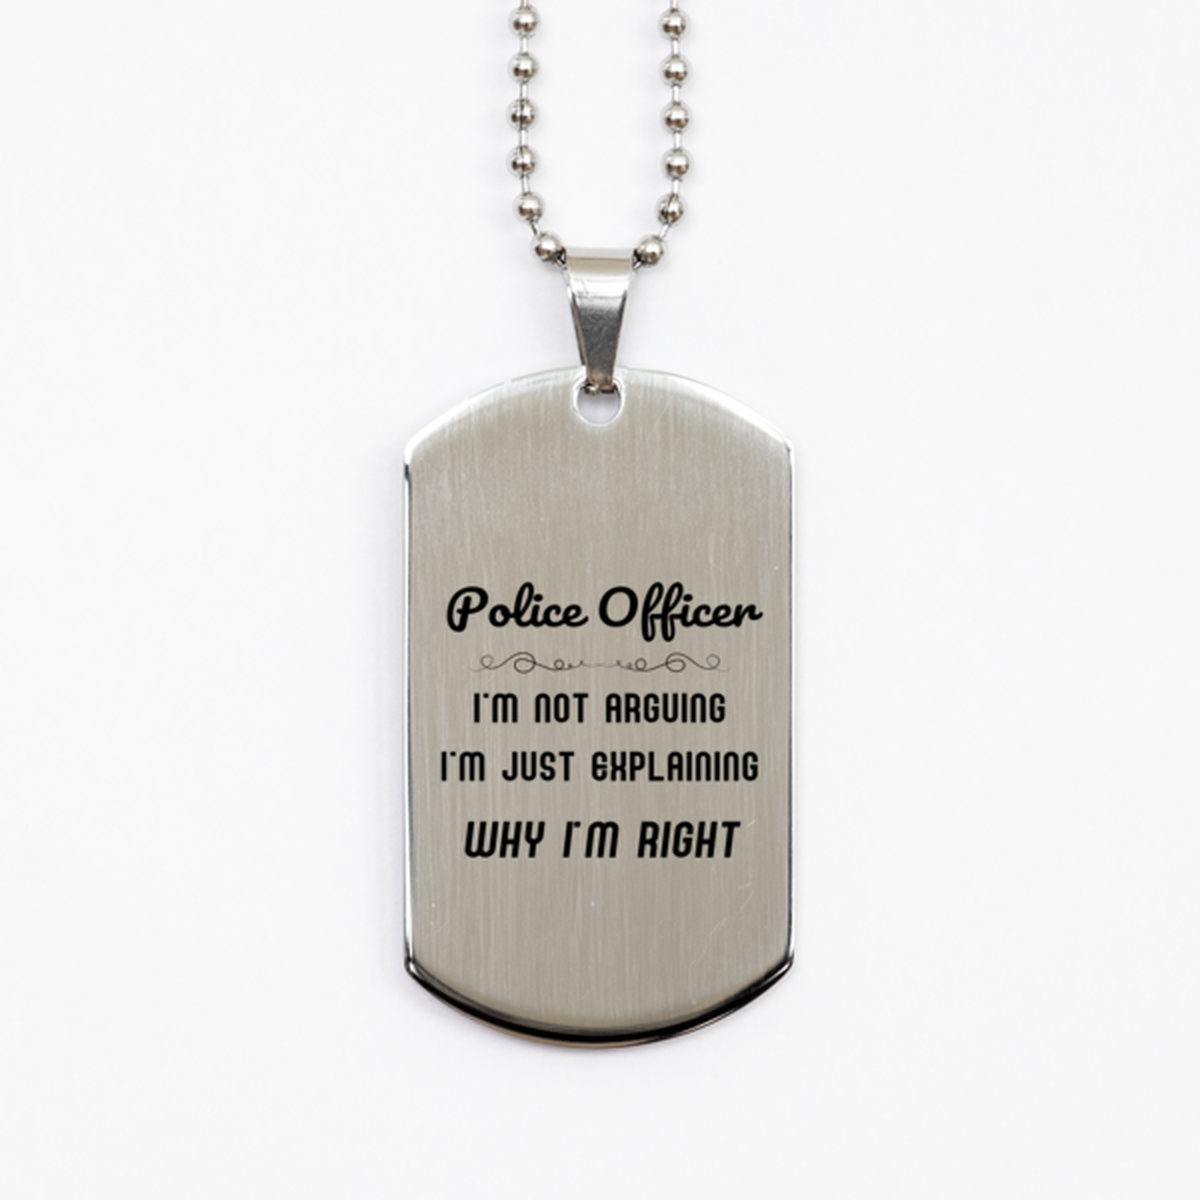 Police Officer I'm not Arguing. I'm Just Explaining Why I'm RIGHT Silver Dog Tag, Funny Saying Quote Police Officer Gifts For Police Officer Graduation Birthday Christmas Gifts for Men Women Coworker